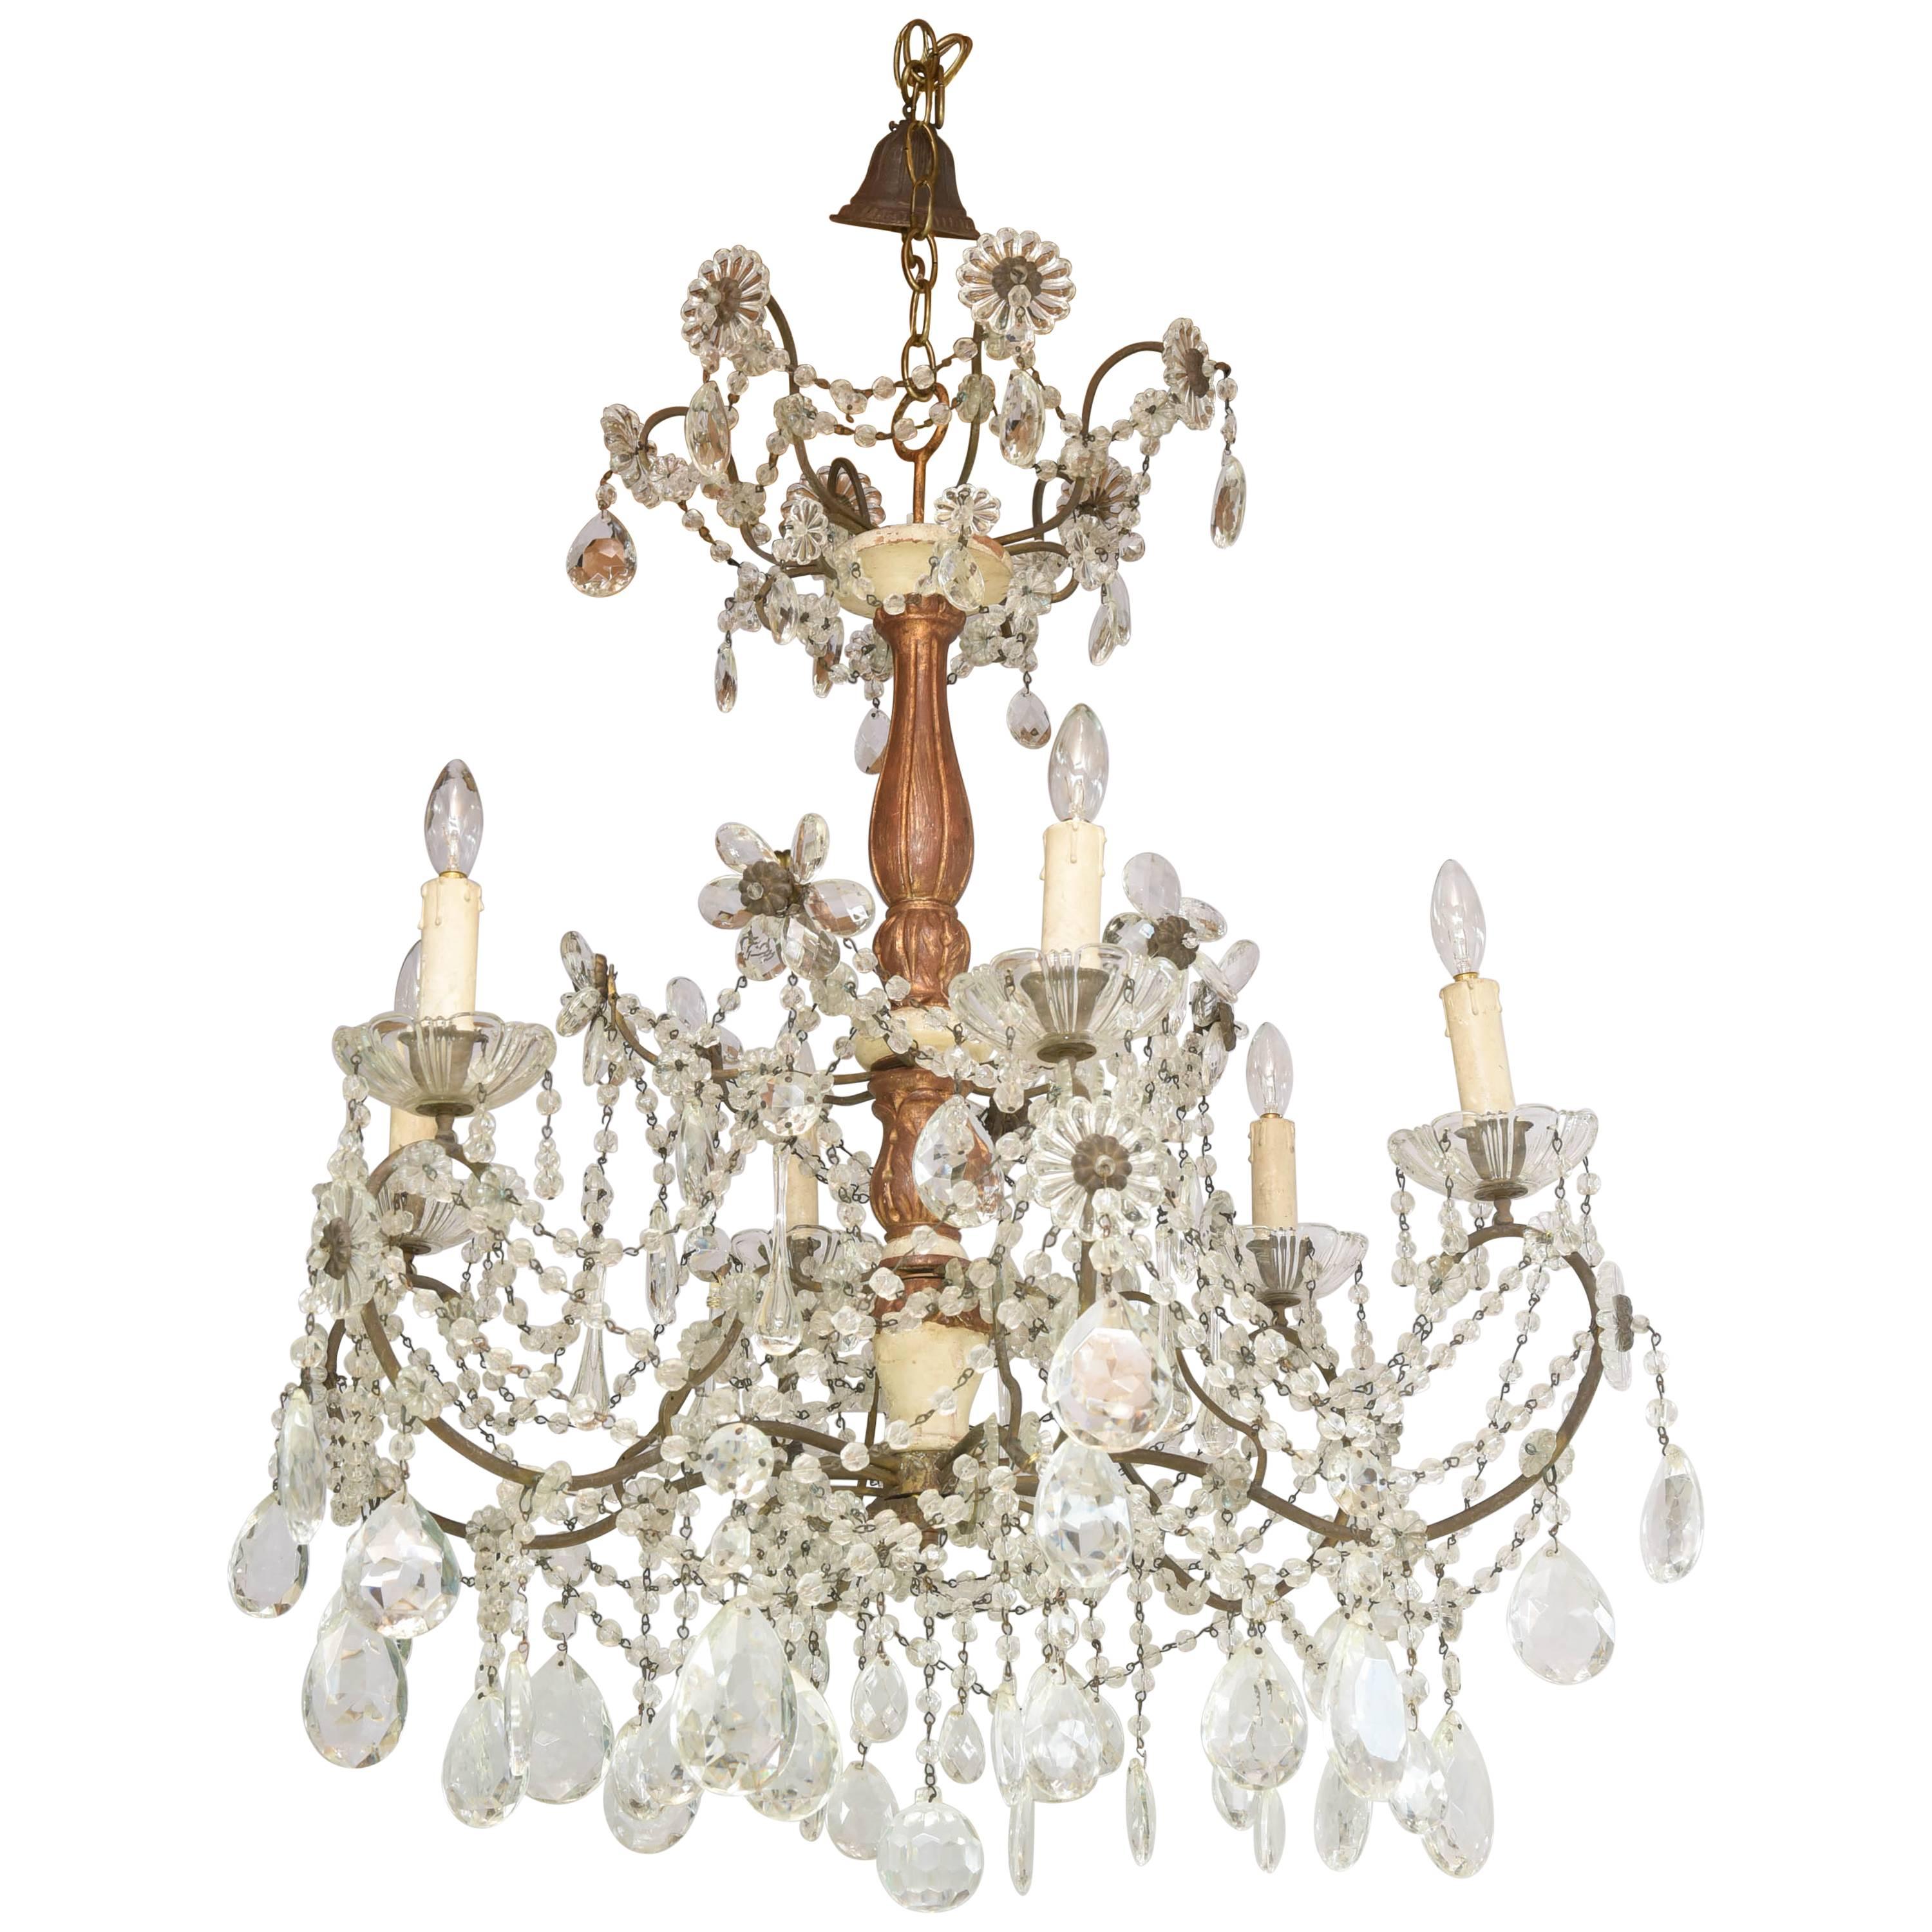 19th Century Italian Pricket Chandelier Draped in Crystal Beads